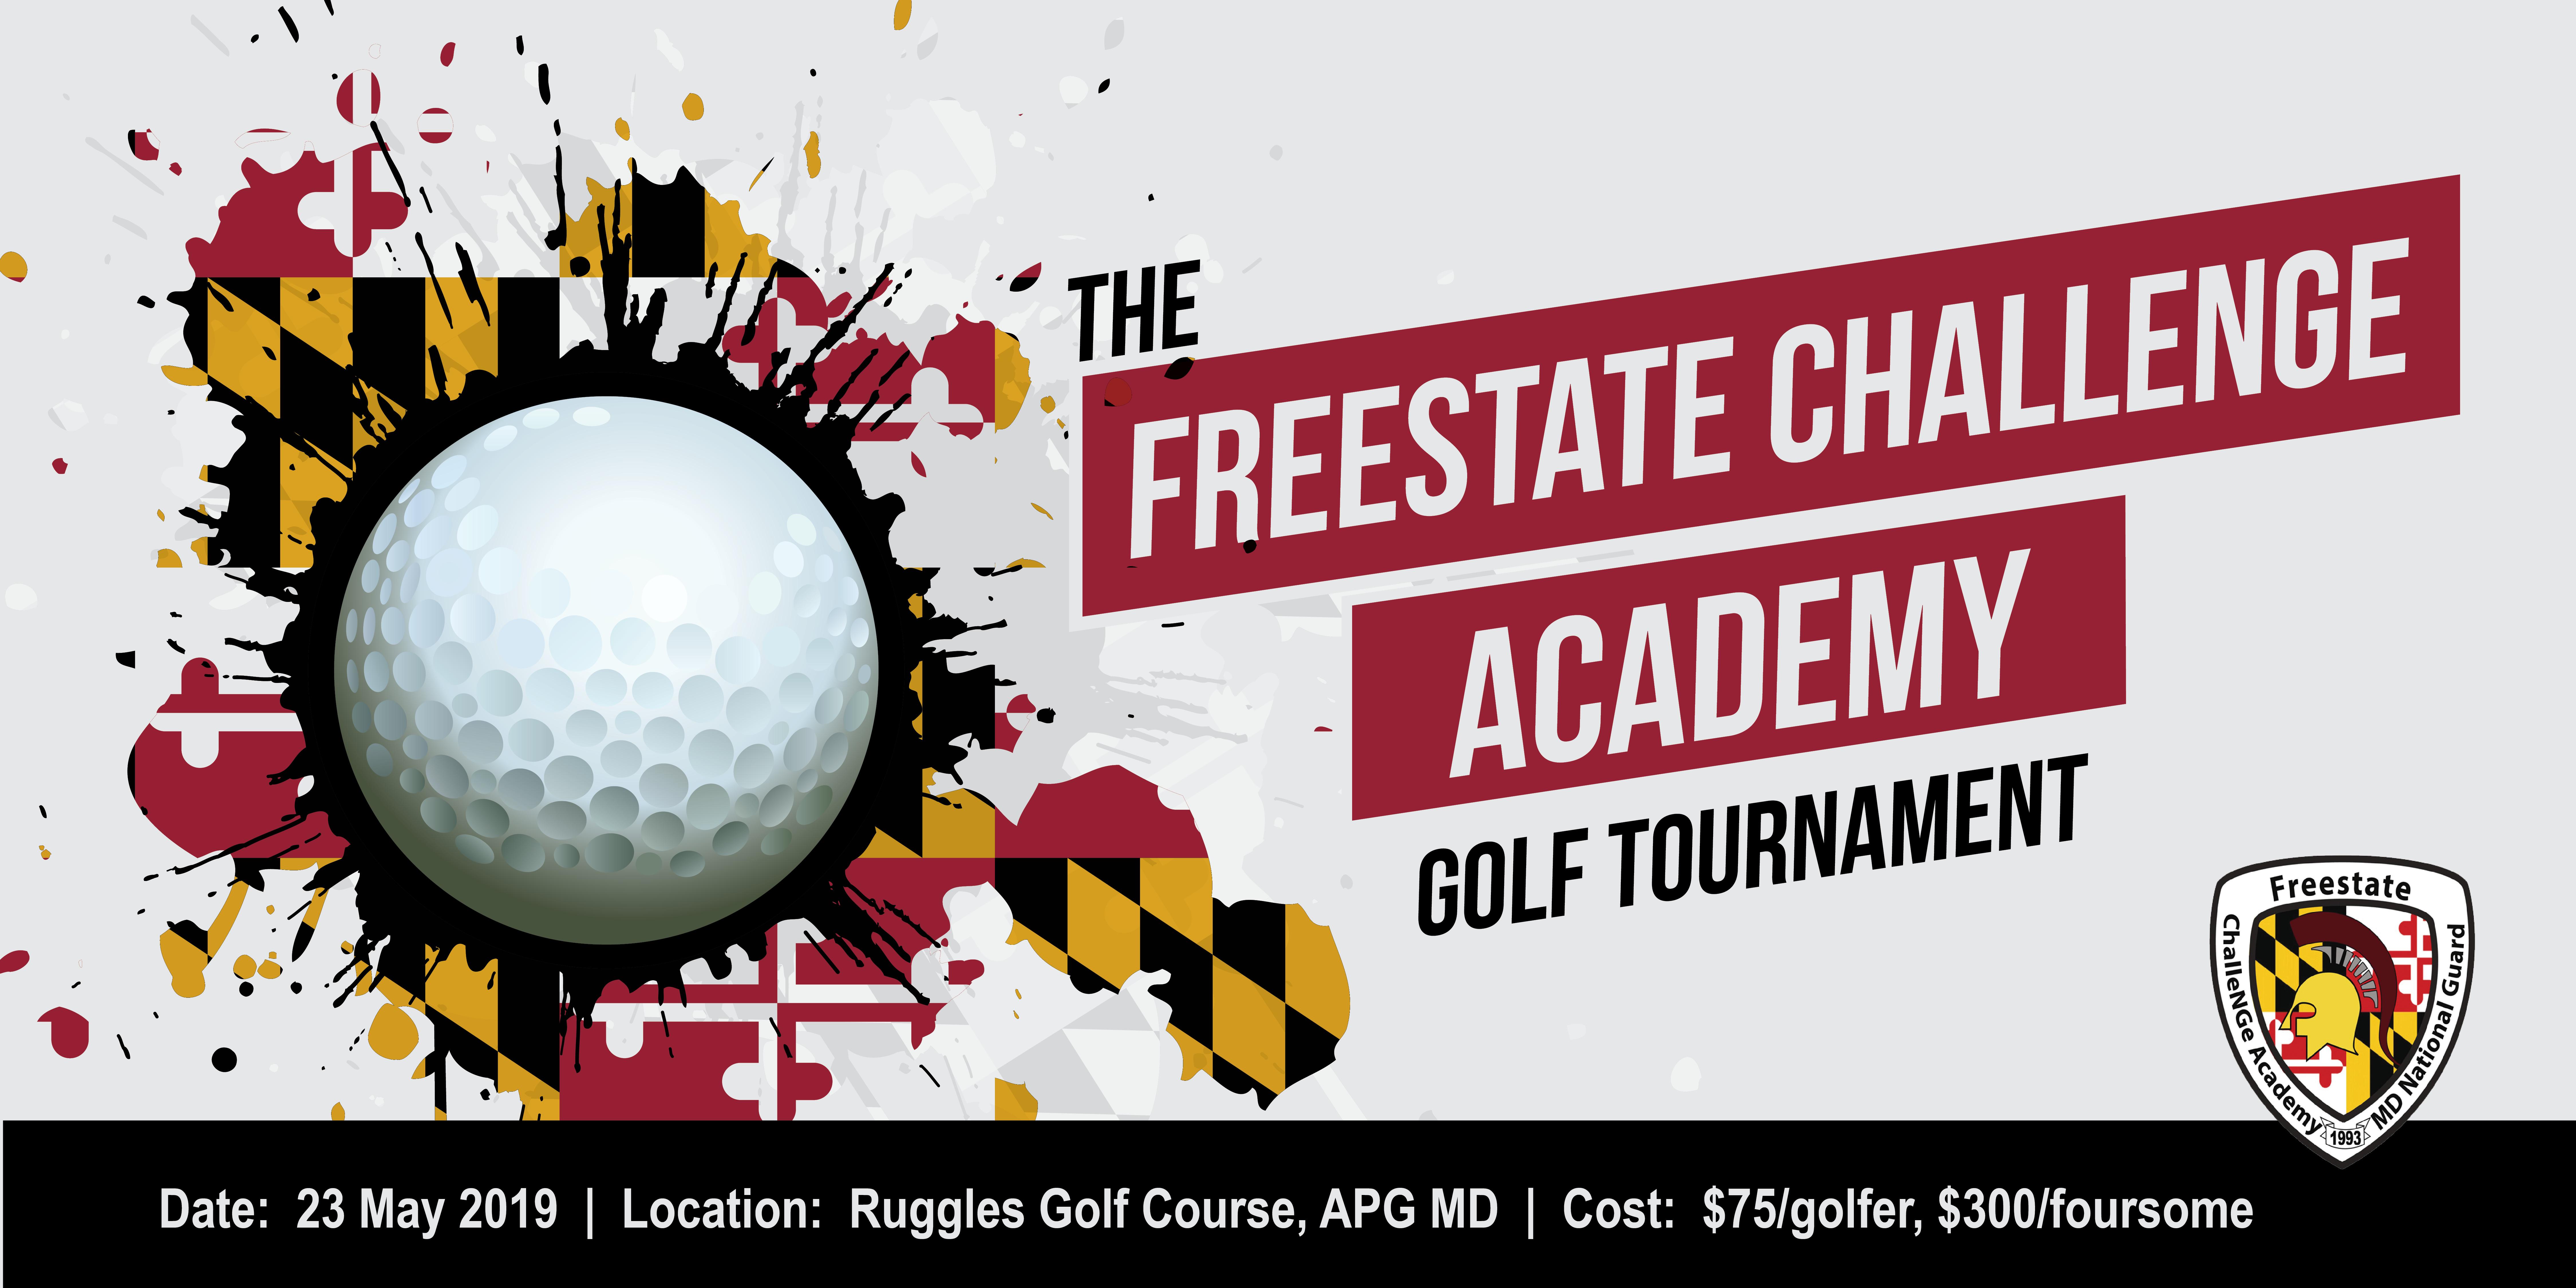 The Freestate ChalleNGe Academy 2nd Annual Golf Tournament